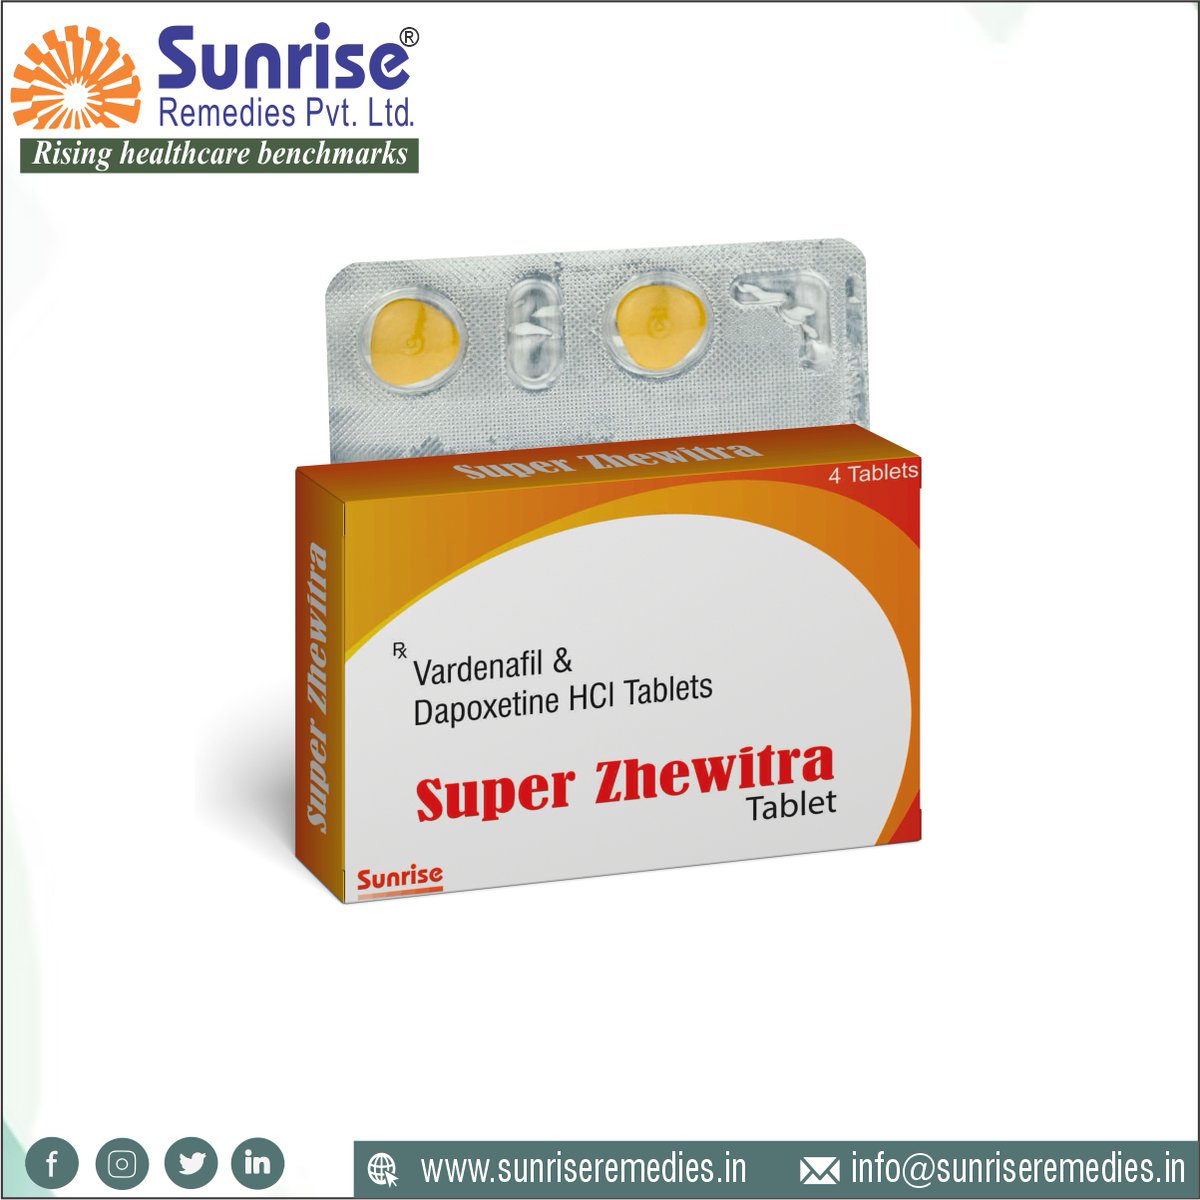 Romantic Lovemaking With #SuperZhewitra Contains Vardenafil & Dapoxetine Most Popular Products From Sunrise Remedies Pvt. Ltd.

Read More: rb.gy/6ql8k

#Vardenafil #Dapoxetine #Avanafil #Udenafil #Tadalafil #Sildenafil #EDProducts #PEproducts #PharmaceuticalCompany